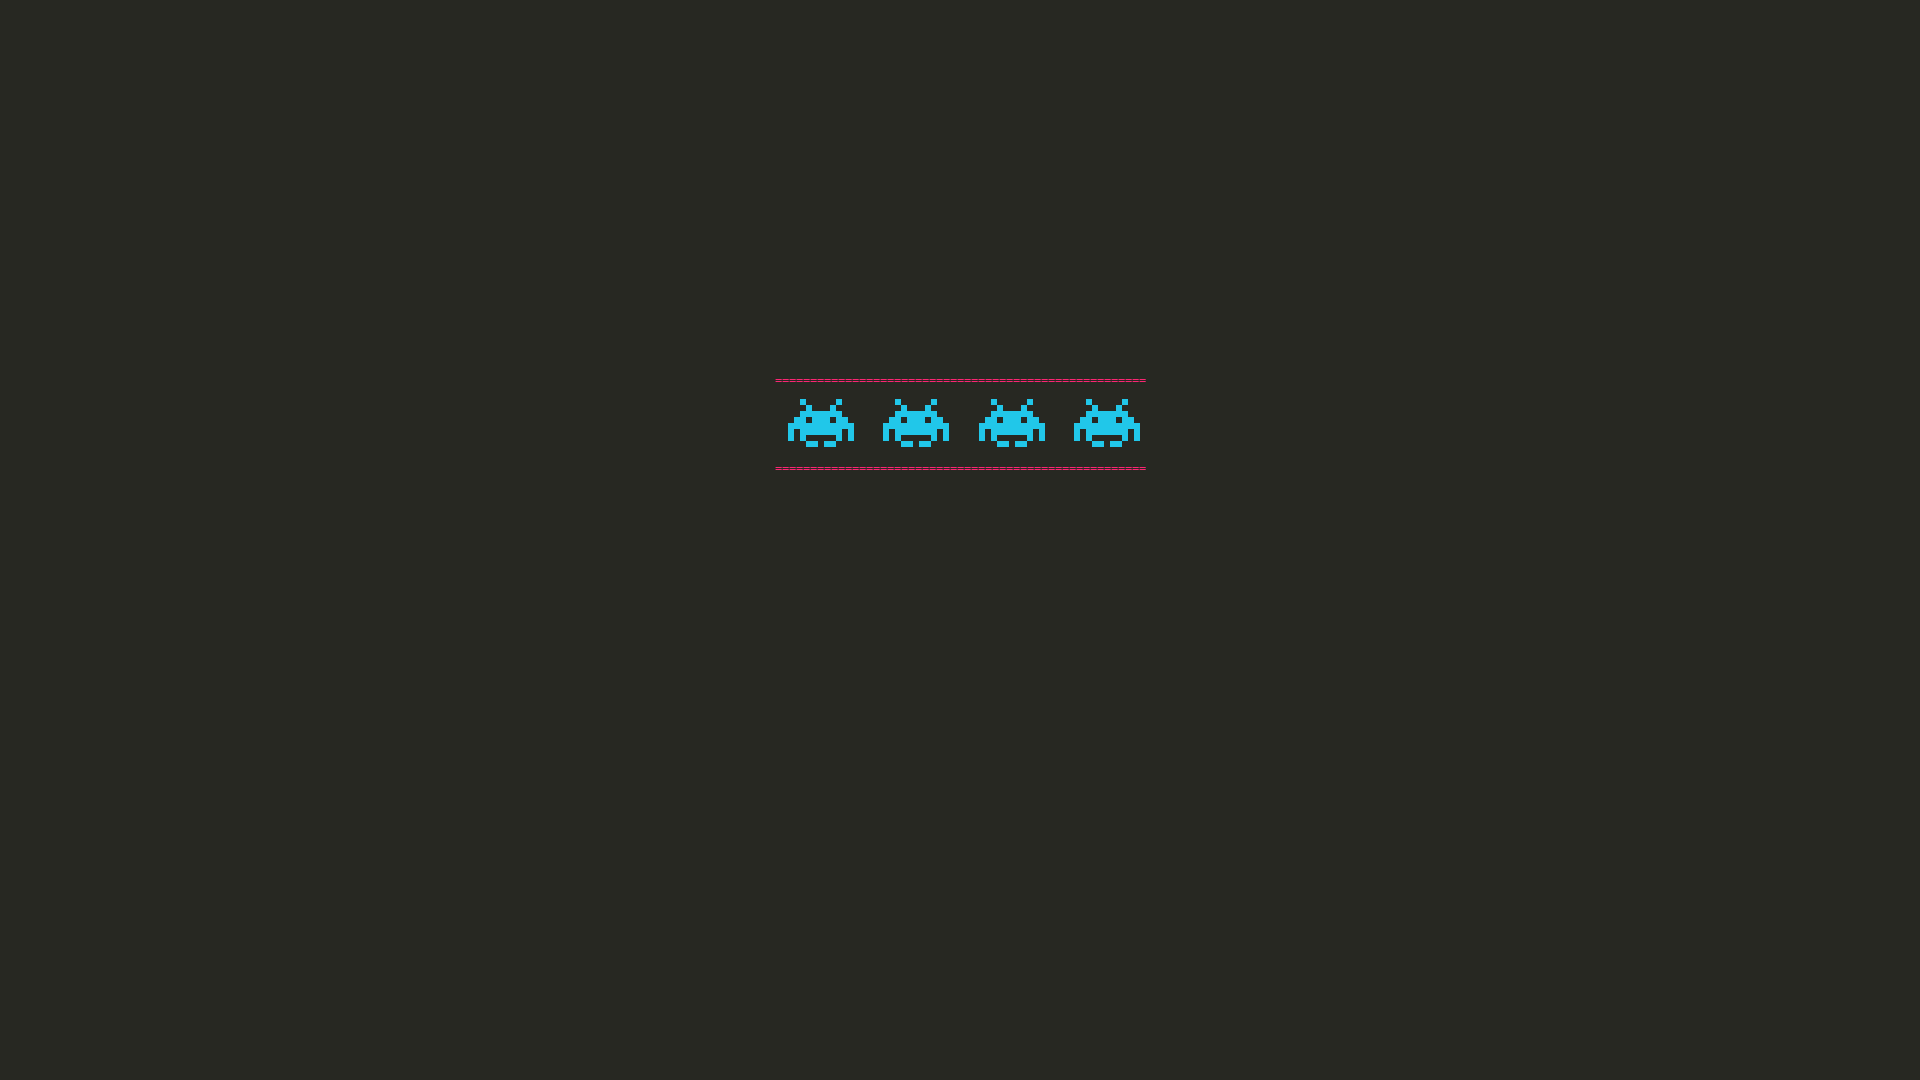 General 1920x1080 Space Invaders minimalism video games video game art retro games simple background